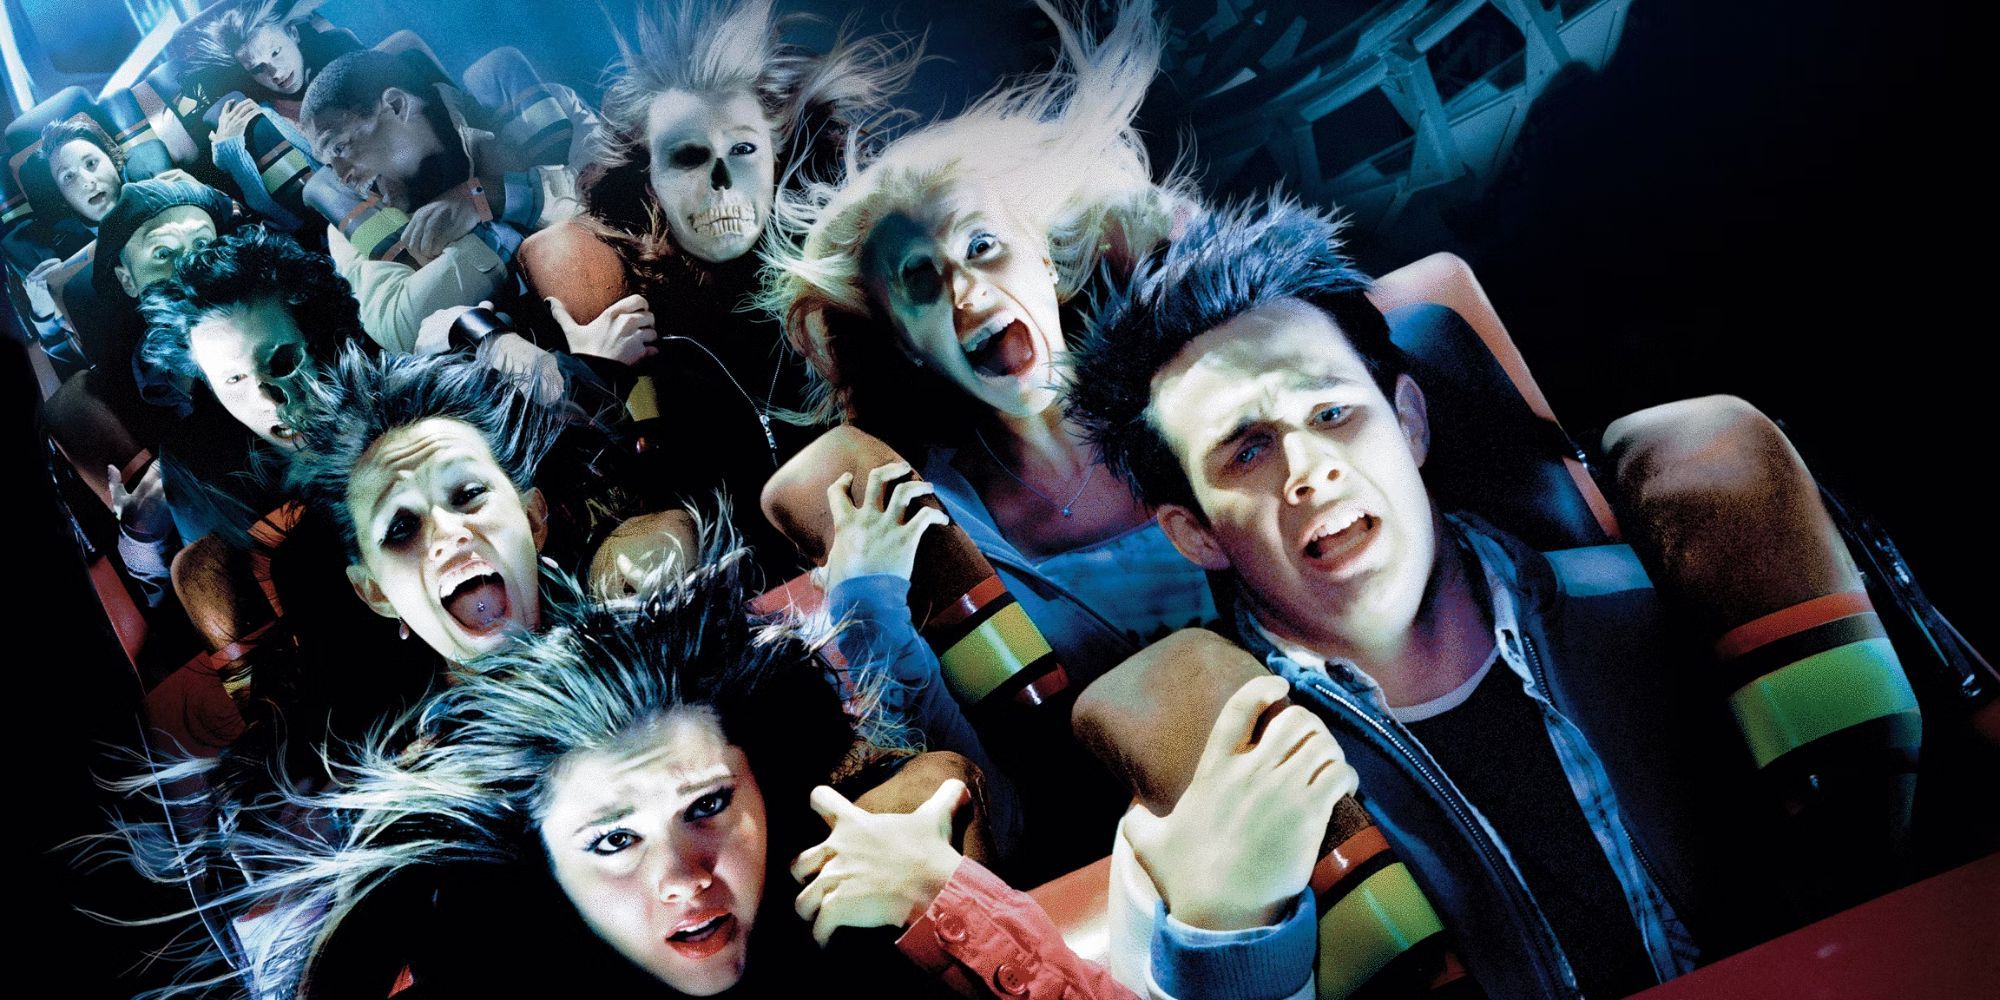 Cropped Final Destination 3 poster featuring people screaming on a rollercoaster